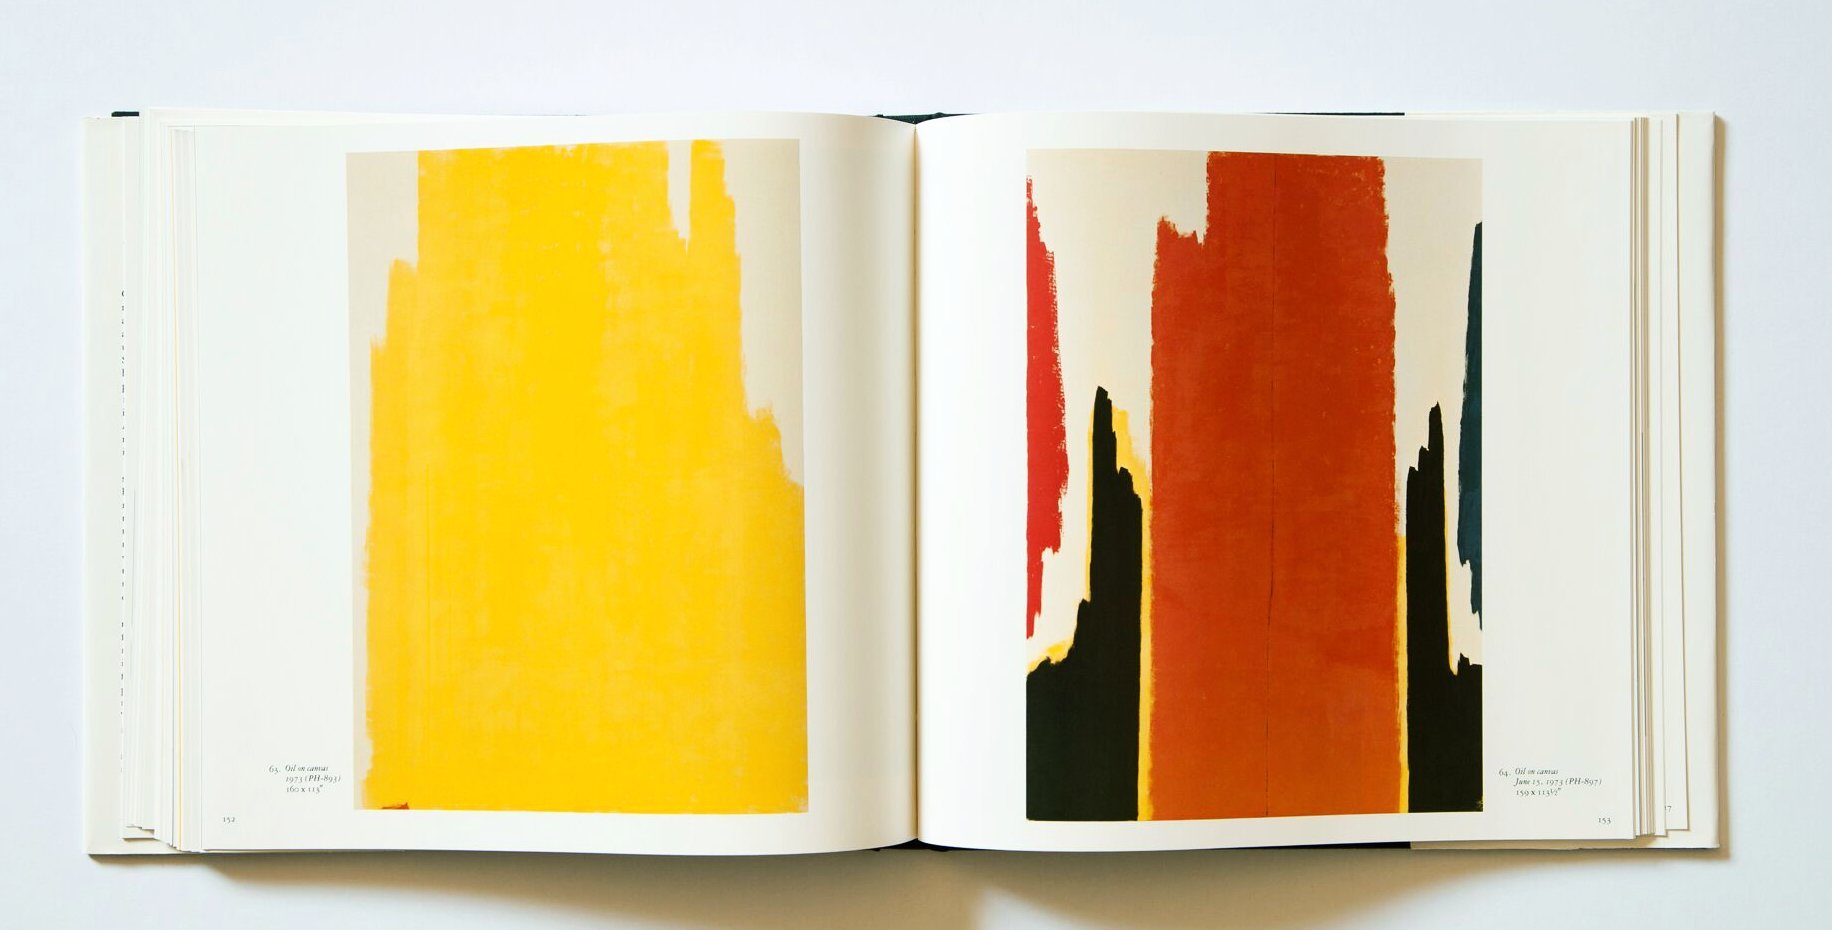 Pages 152-153 from ‘The Metropolitan Museum of Art Clyfford Still Catalog’ featuring PH-893 and PH-897.